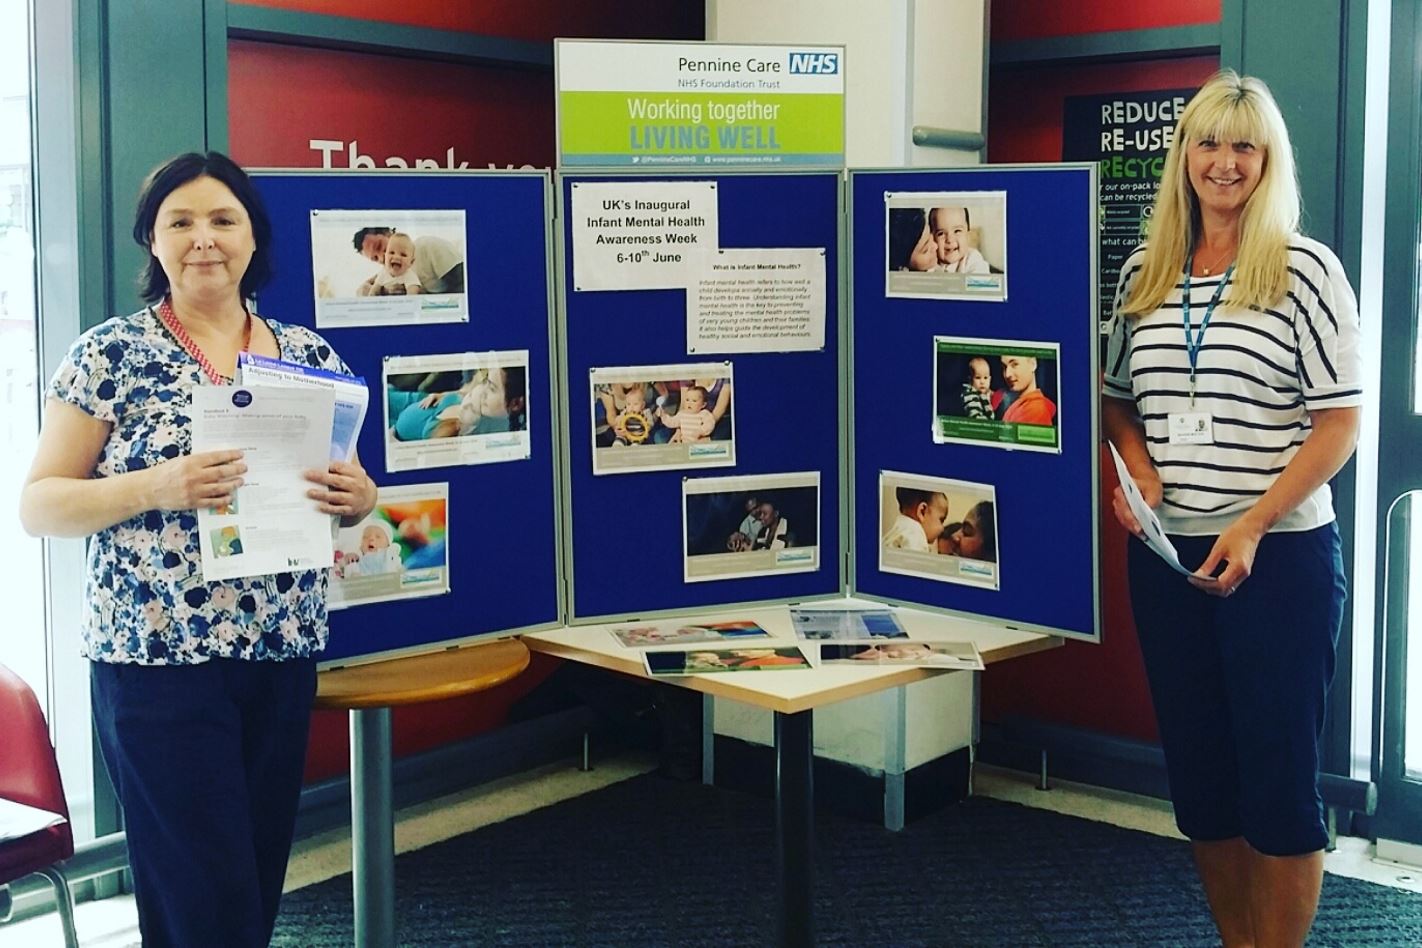 Jo Bolton and colleague supporting #IMHAW16